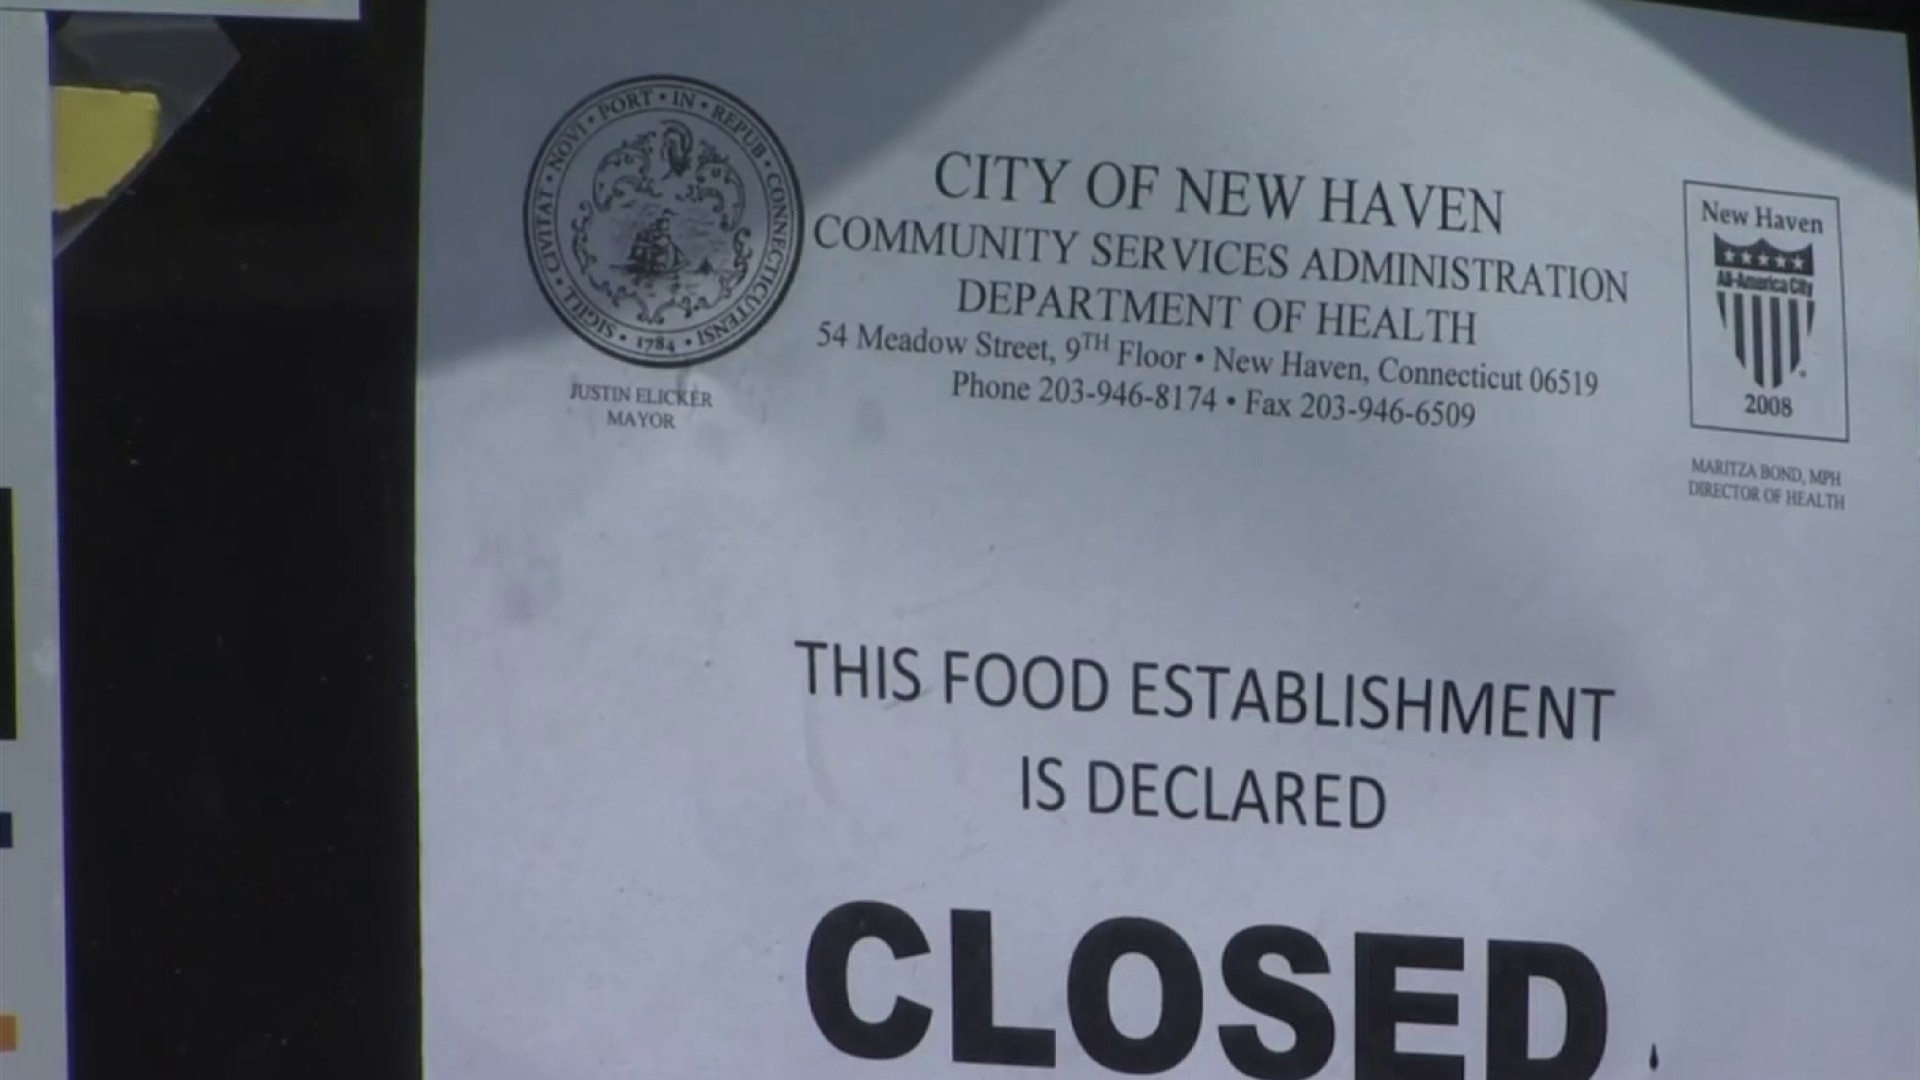 A fire, a pandemic: New Haven restaurants battle to stay open